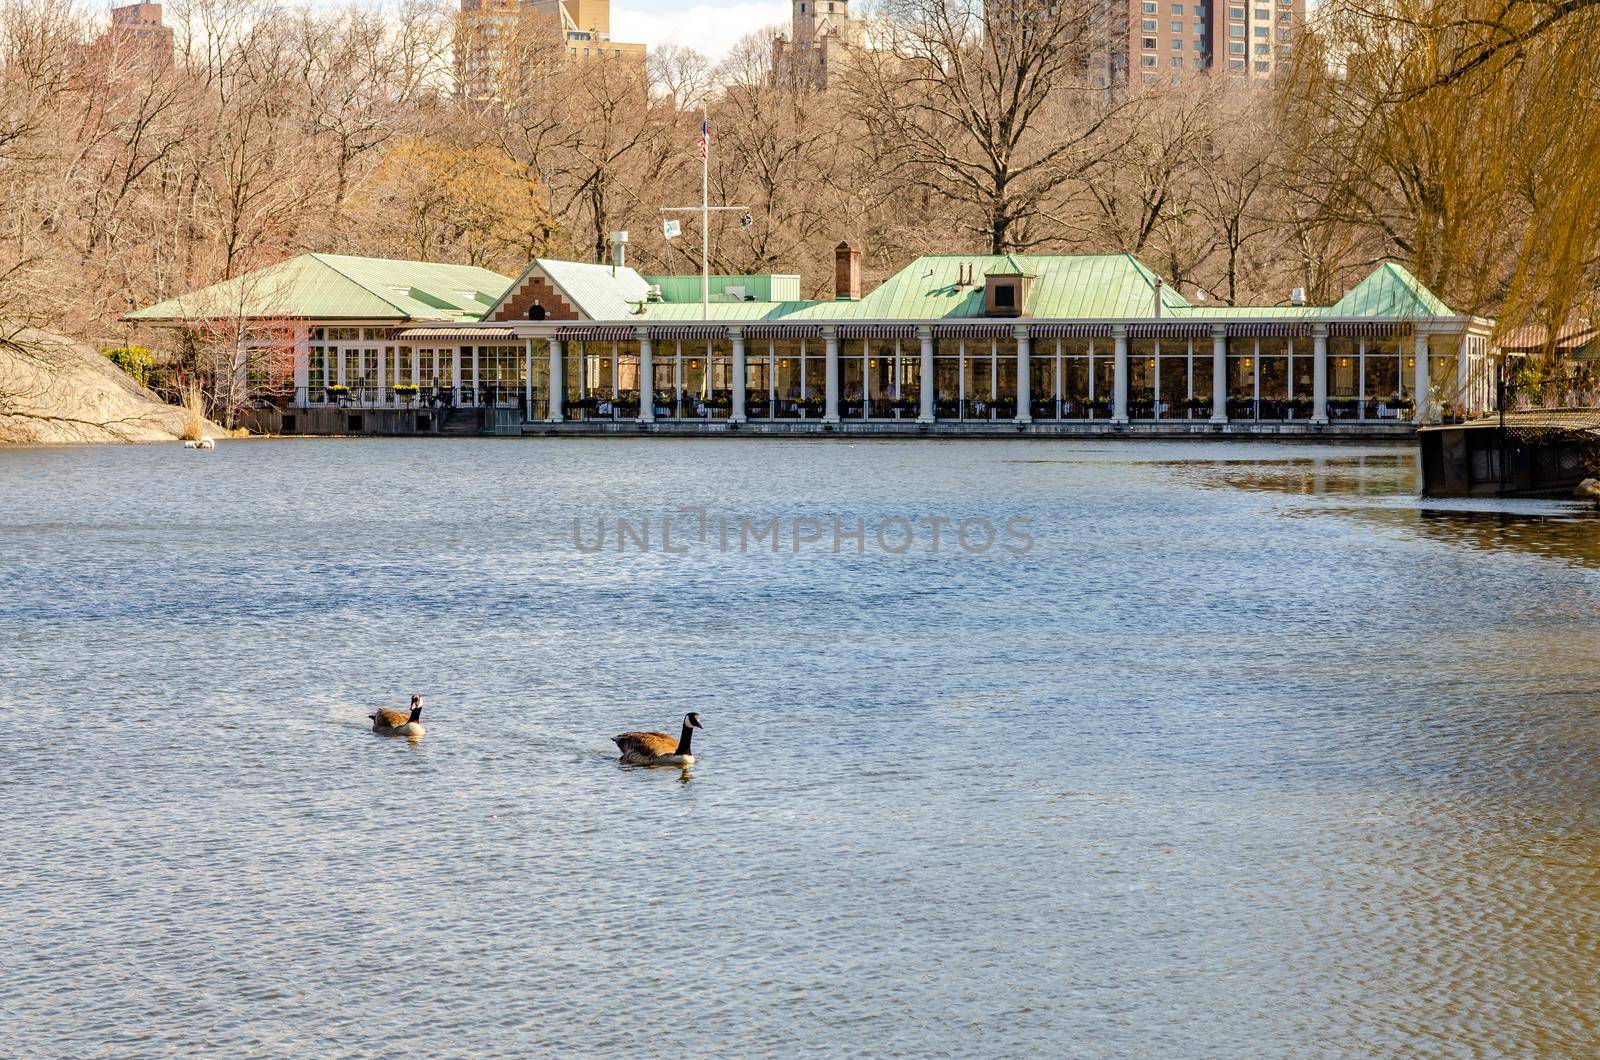 Central Park Boathouse Restaurant, New York City during in winter daylight with lake and two birds on the water in the forefront, horizontal